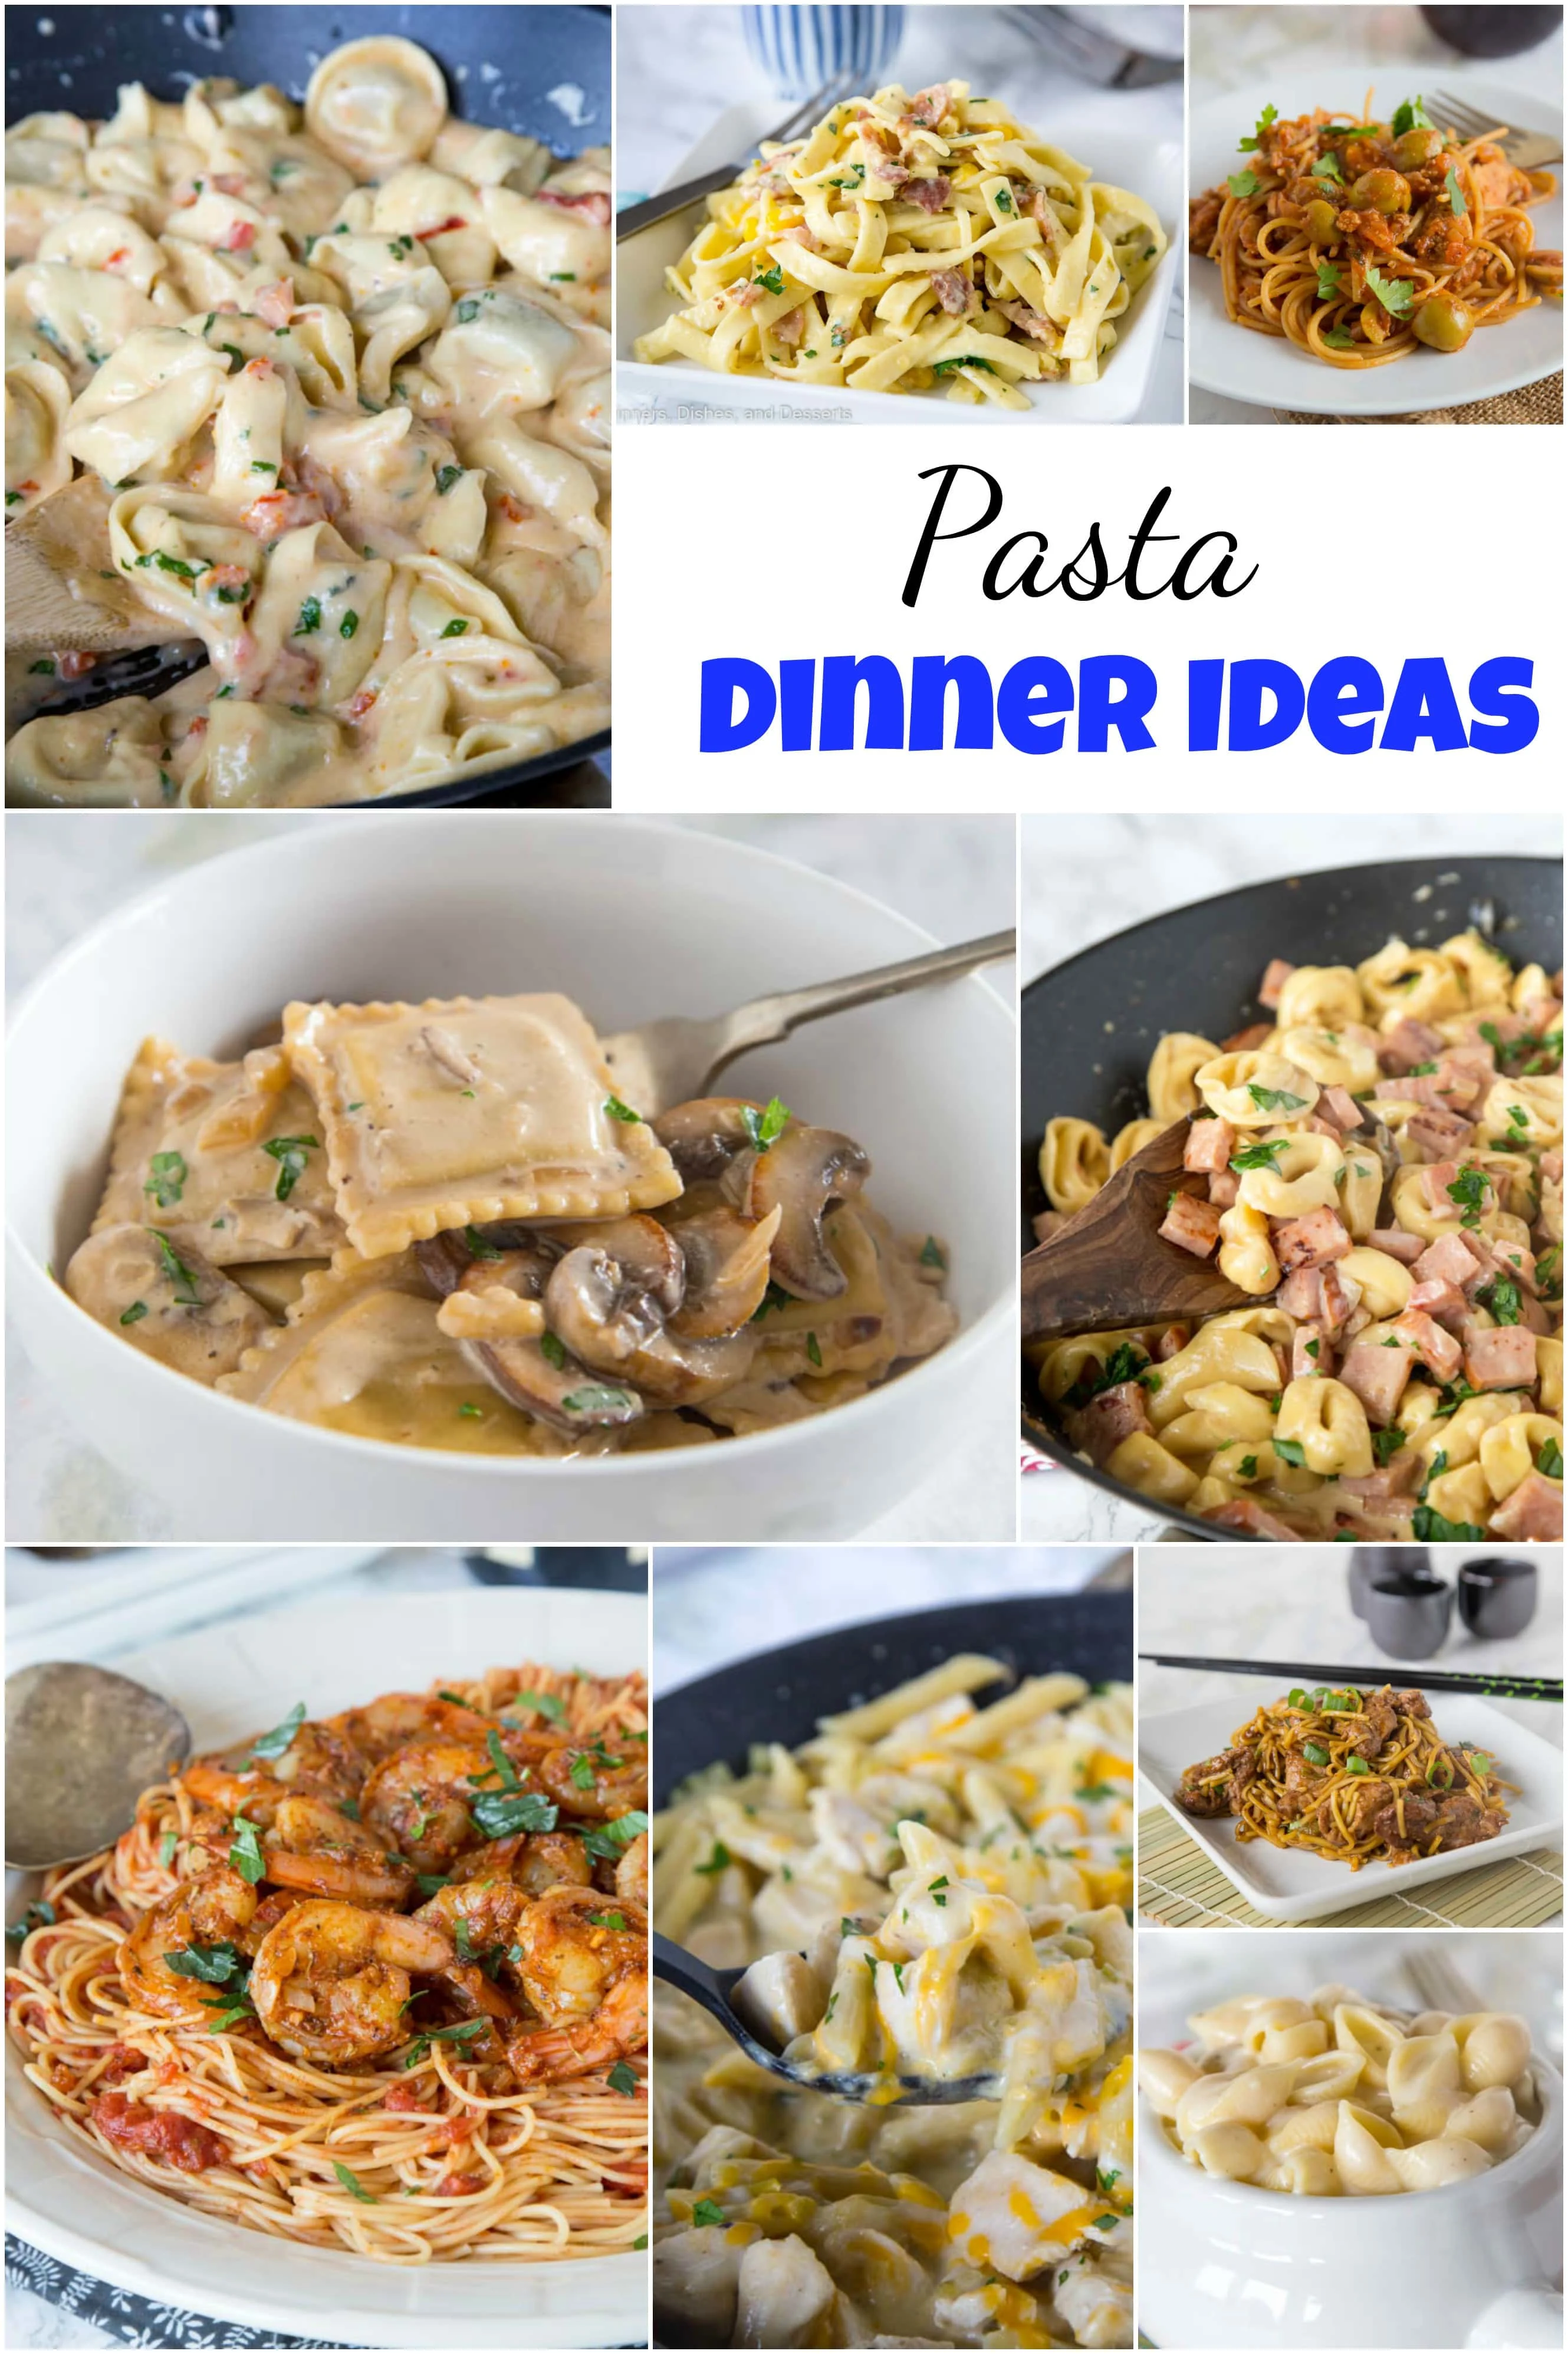 Pasta Dinner Ideas - Craving pasta?  Here are 25 of my favorite pasta dinner ideas that are more than just spaghetti and meatballs.  Branch out and cure that pasta craving with any of these great dinner ideas!